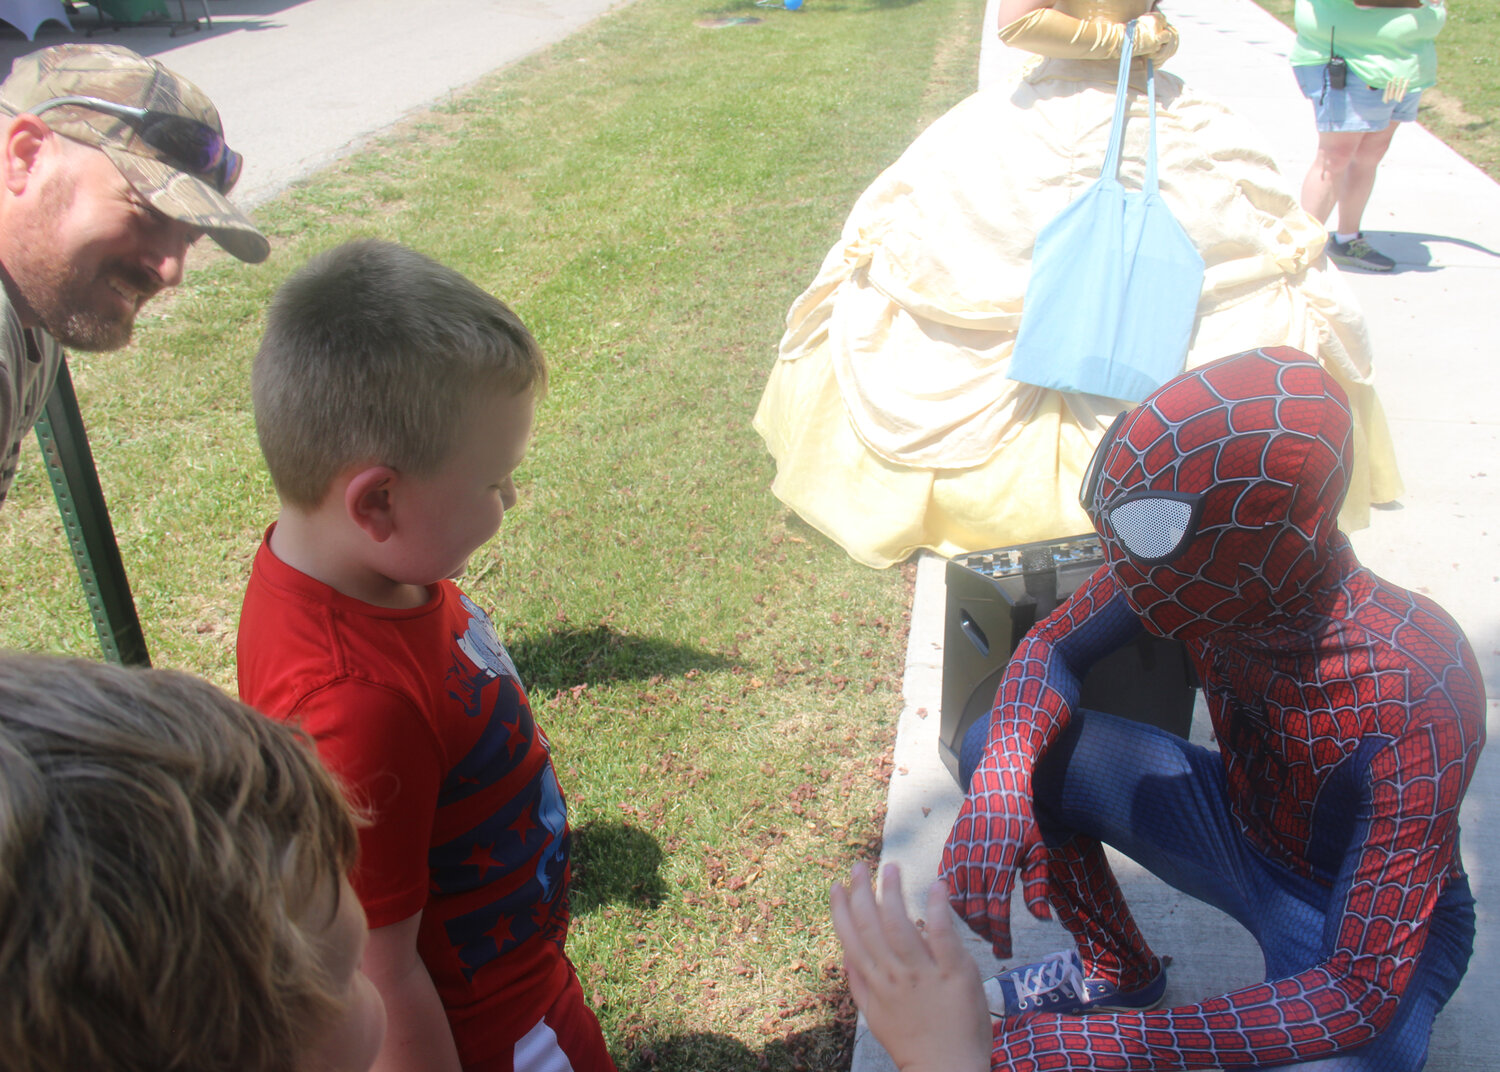 Spiderman greets a young boy during Summerfest.